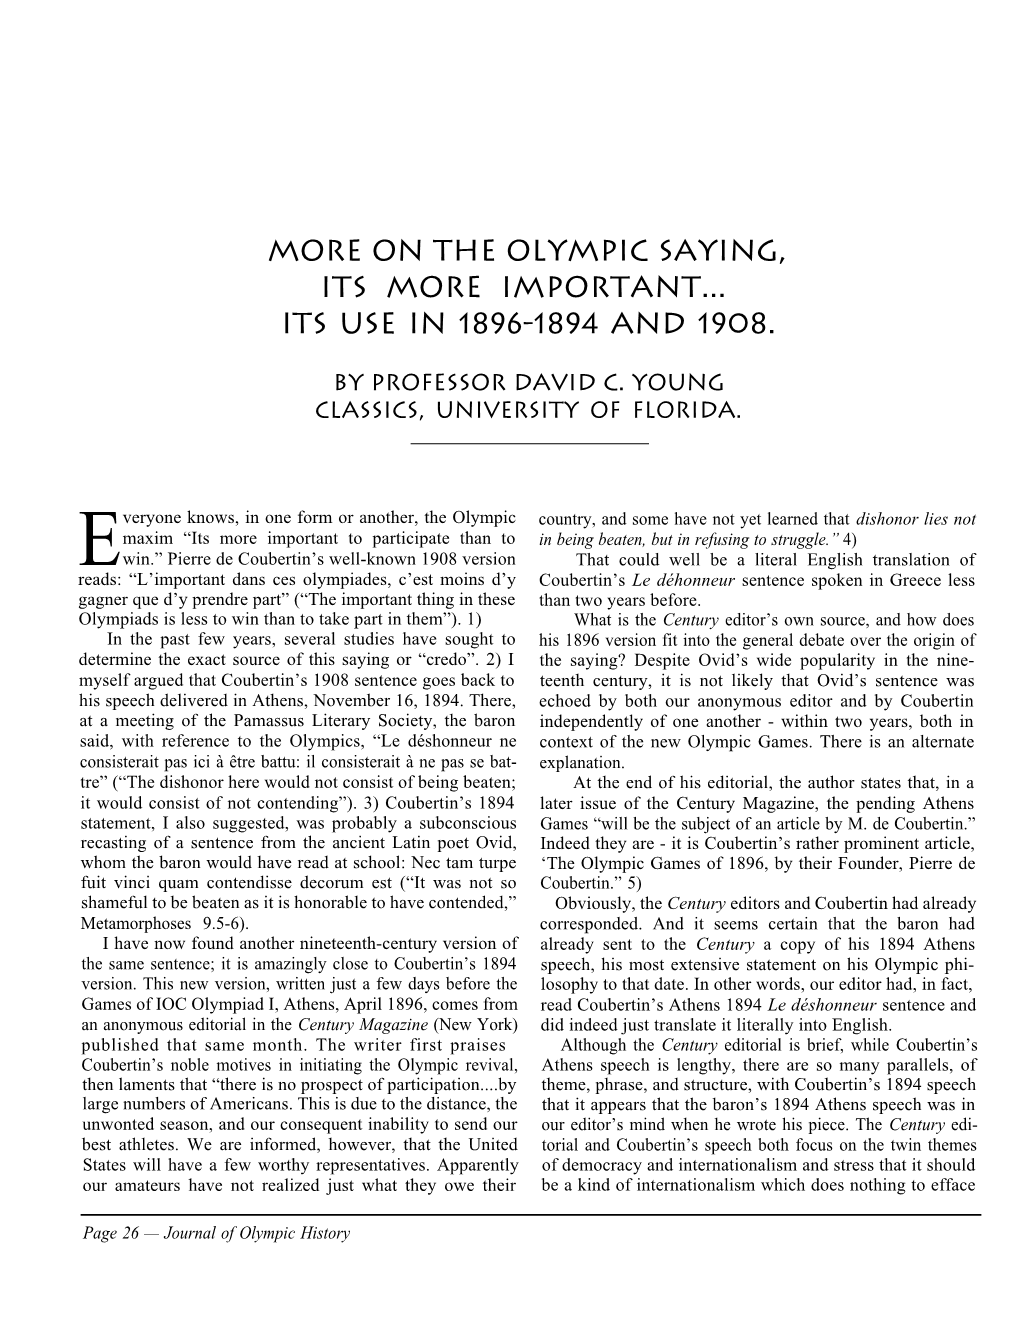 More on the Olympic Saying, Its More Important – Its Use in 1896--1894